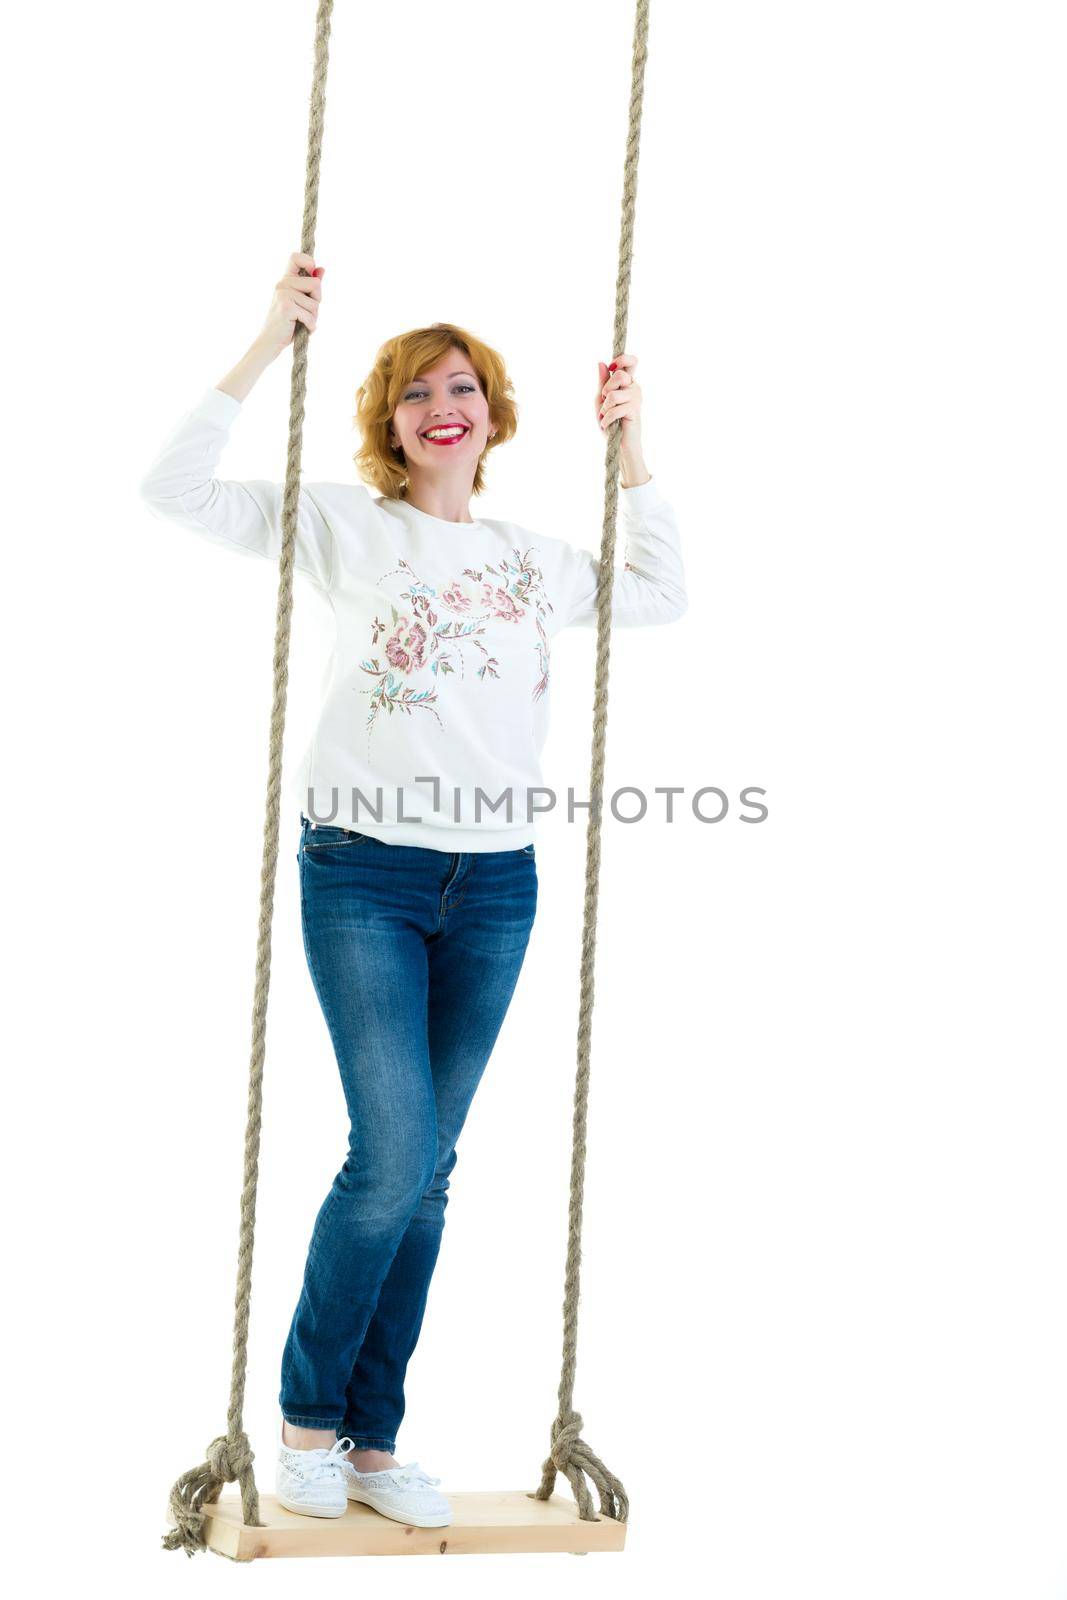 Beautiful young woman swinging fun on a swing. Concept summer vacation. Isolated on white background.